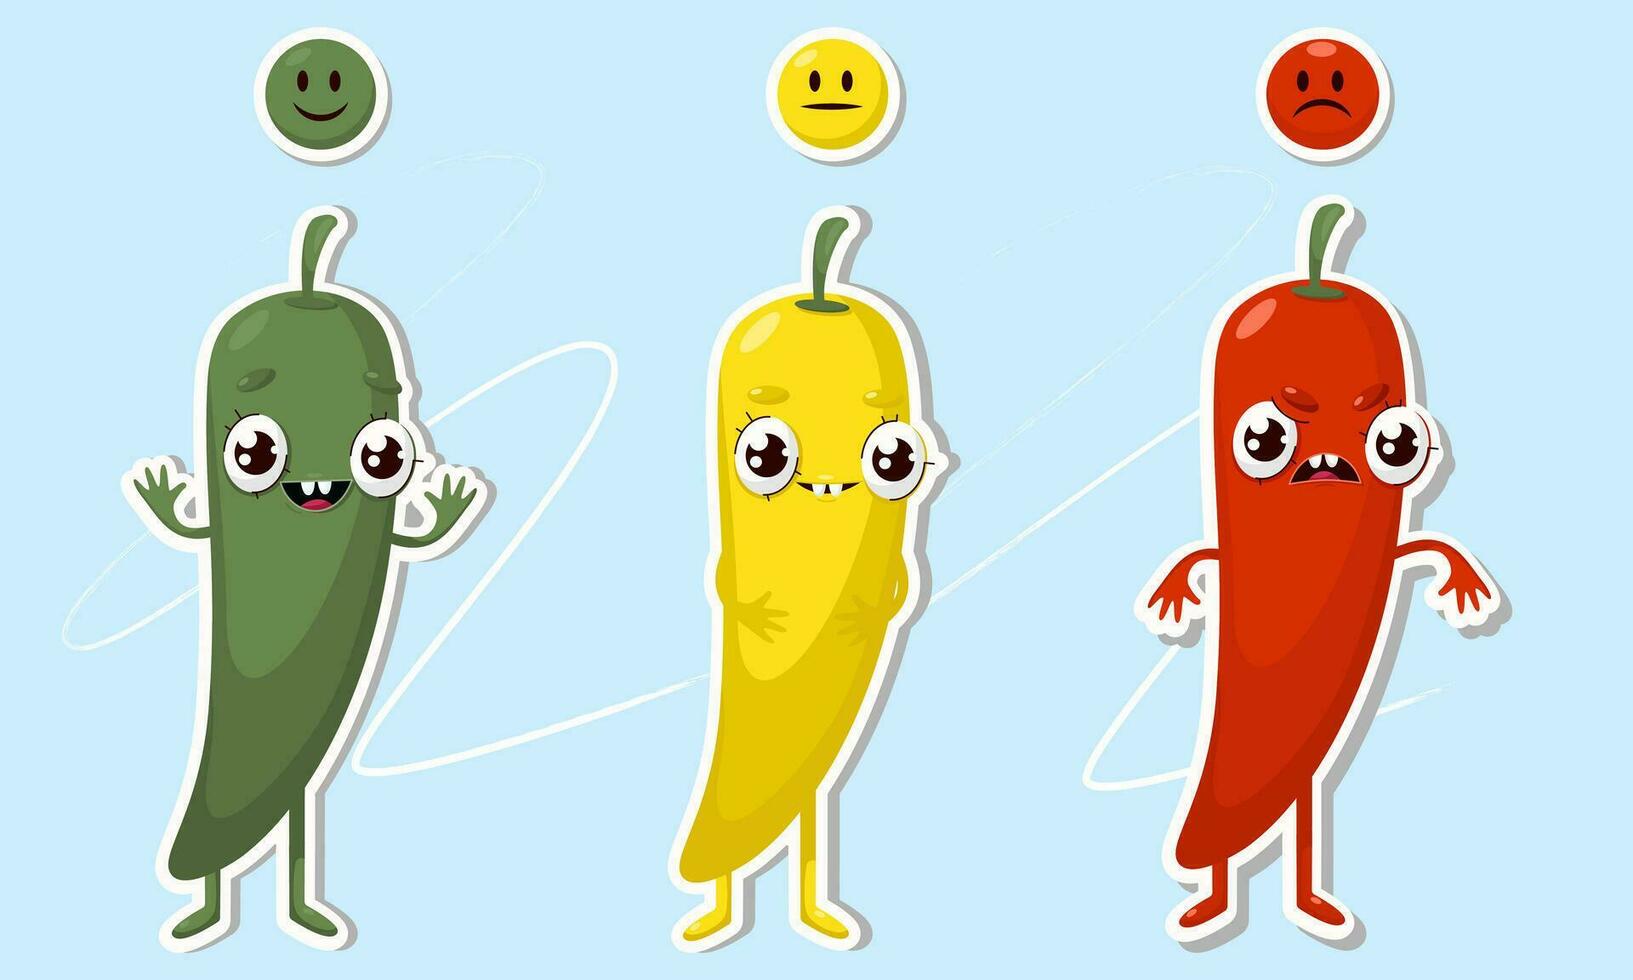 Chili pepper spicy food level stickers. sad and positive chili.Hand drawn style vector design illustrations